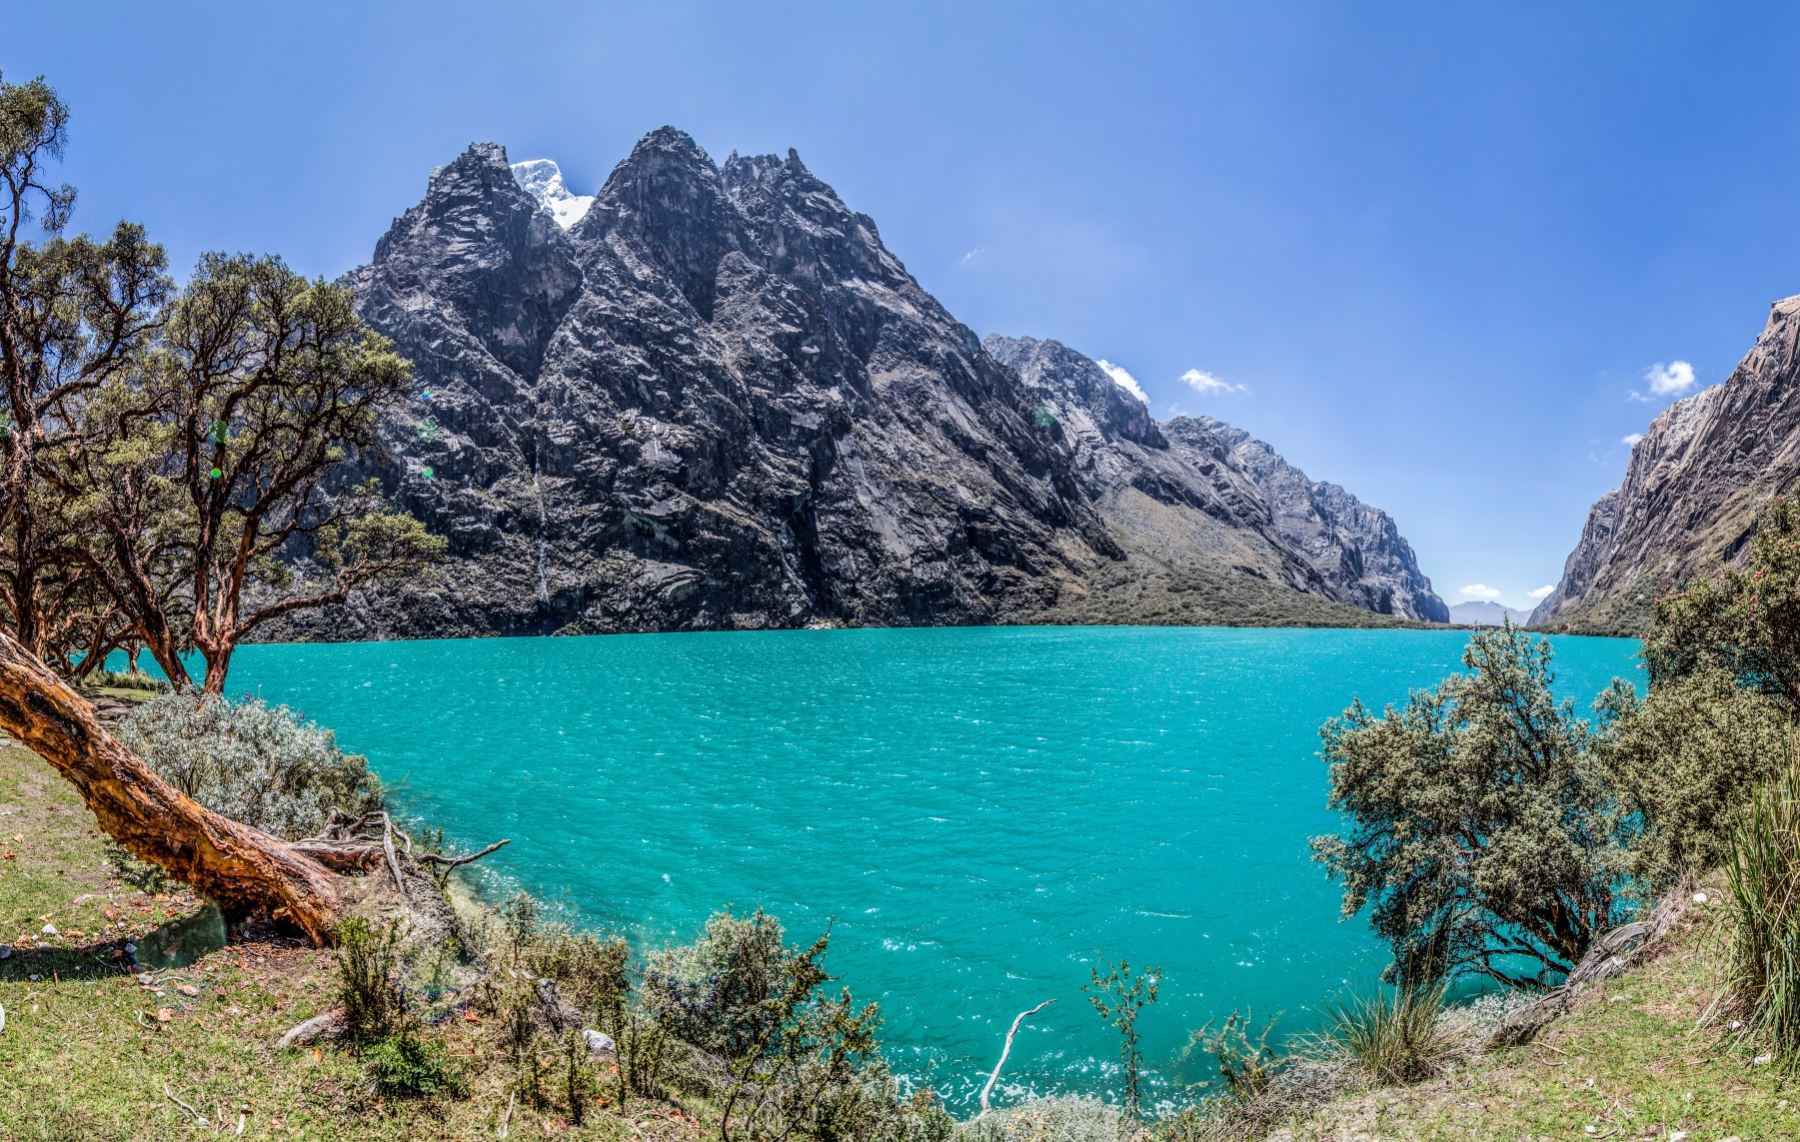 Peru: Over 180,000 tourists visited Huascaran National Park in 2014 ...